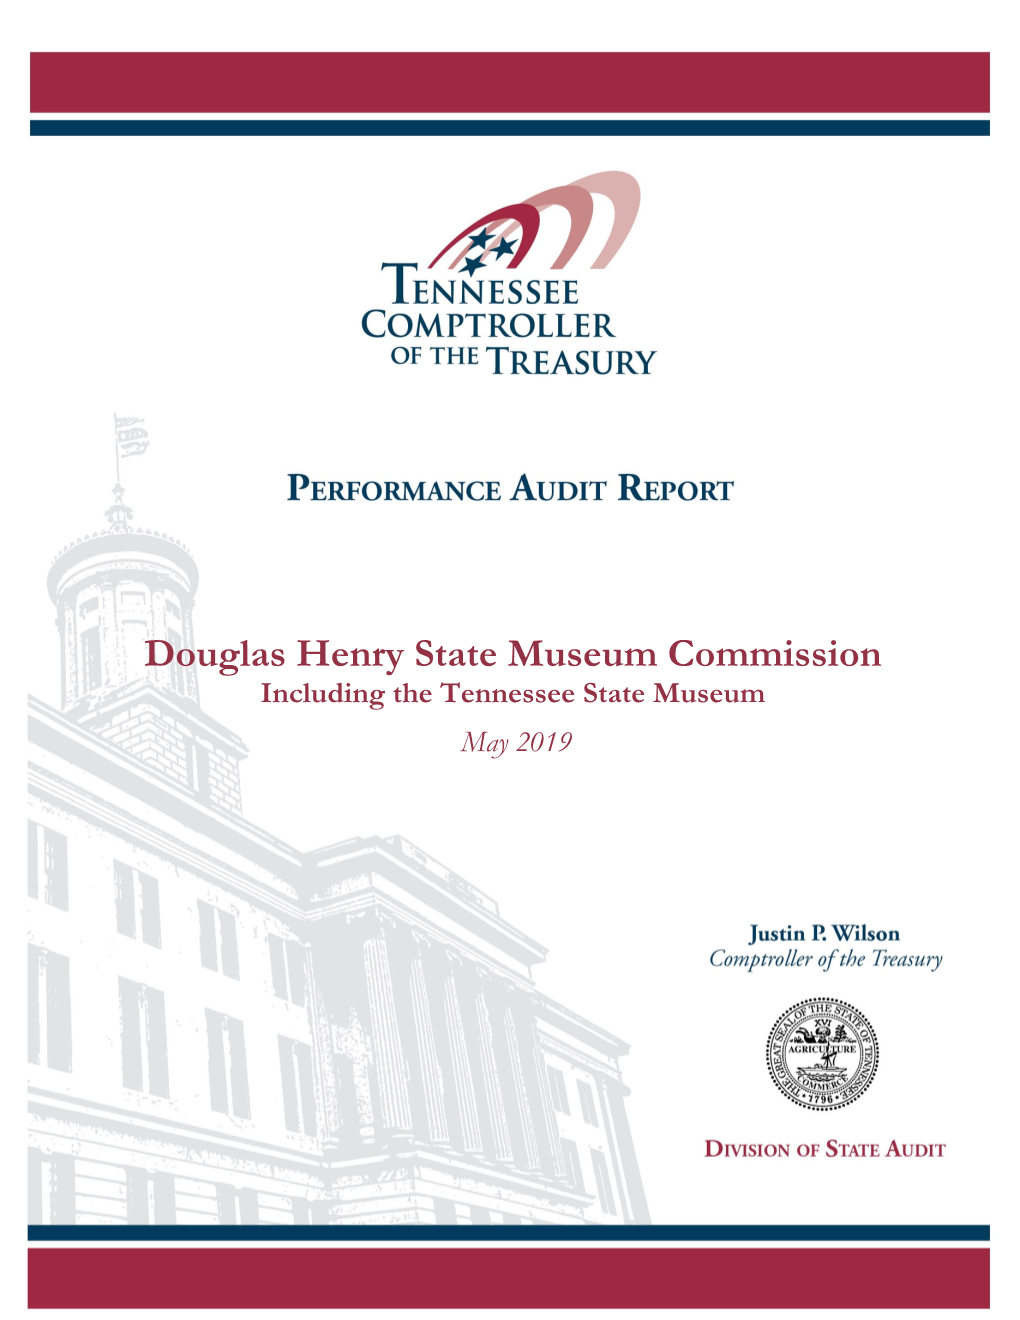 Douglas Henry State Museum Commission Performance Audit